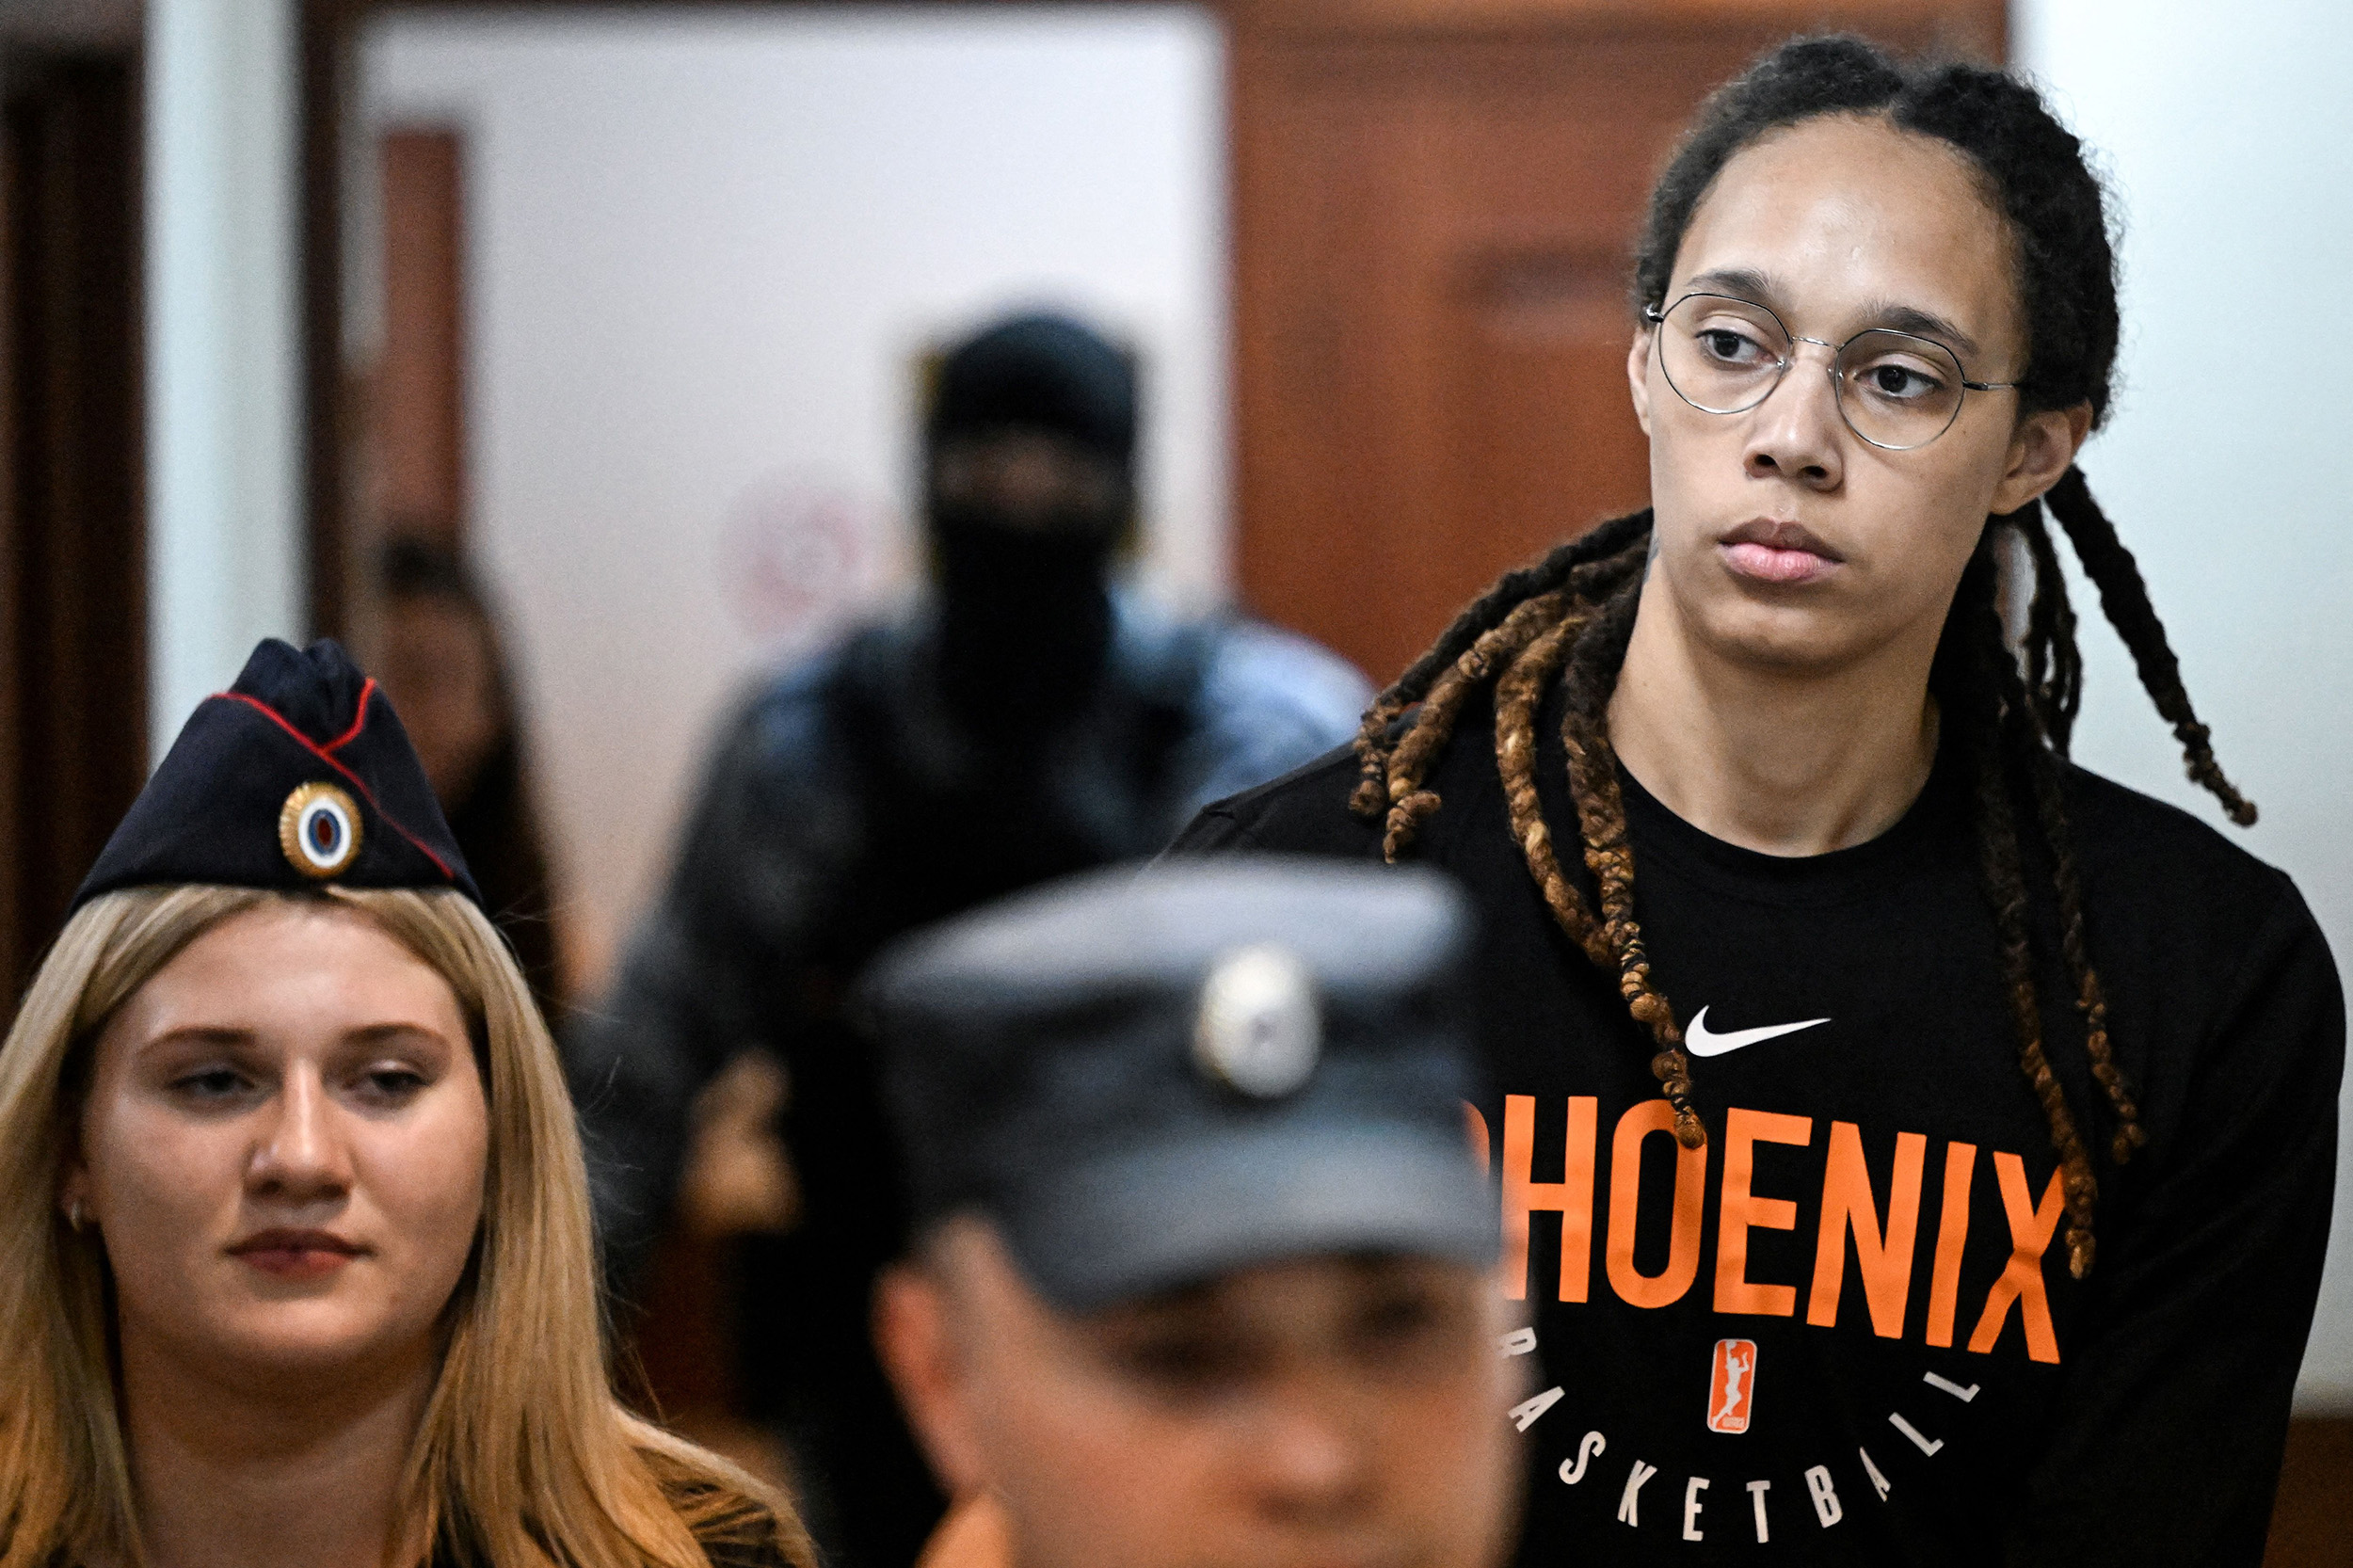 US WNBA basketball superstar Brittney Griner arrives to a hearing at the Khimki Court, outside Moscow, Russia, on July 27.